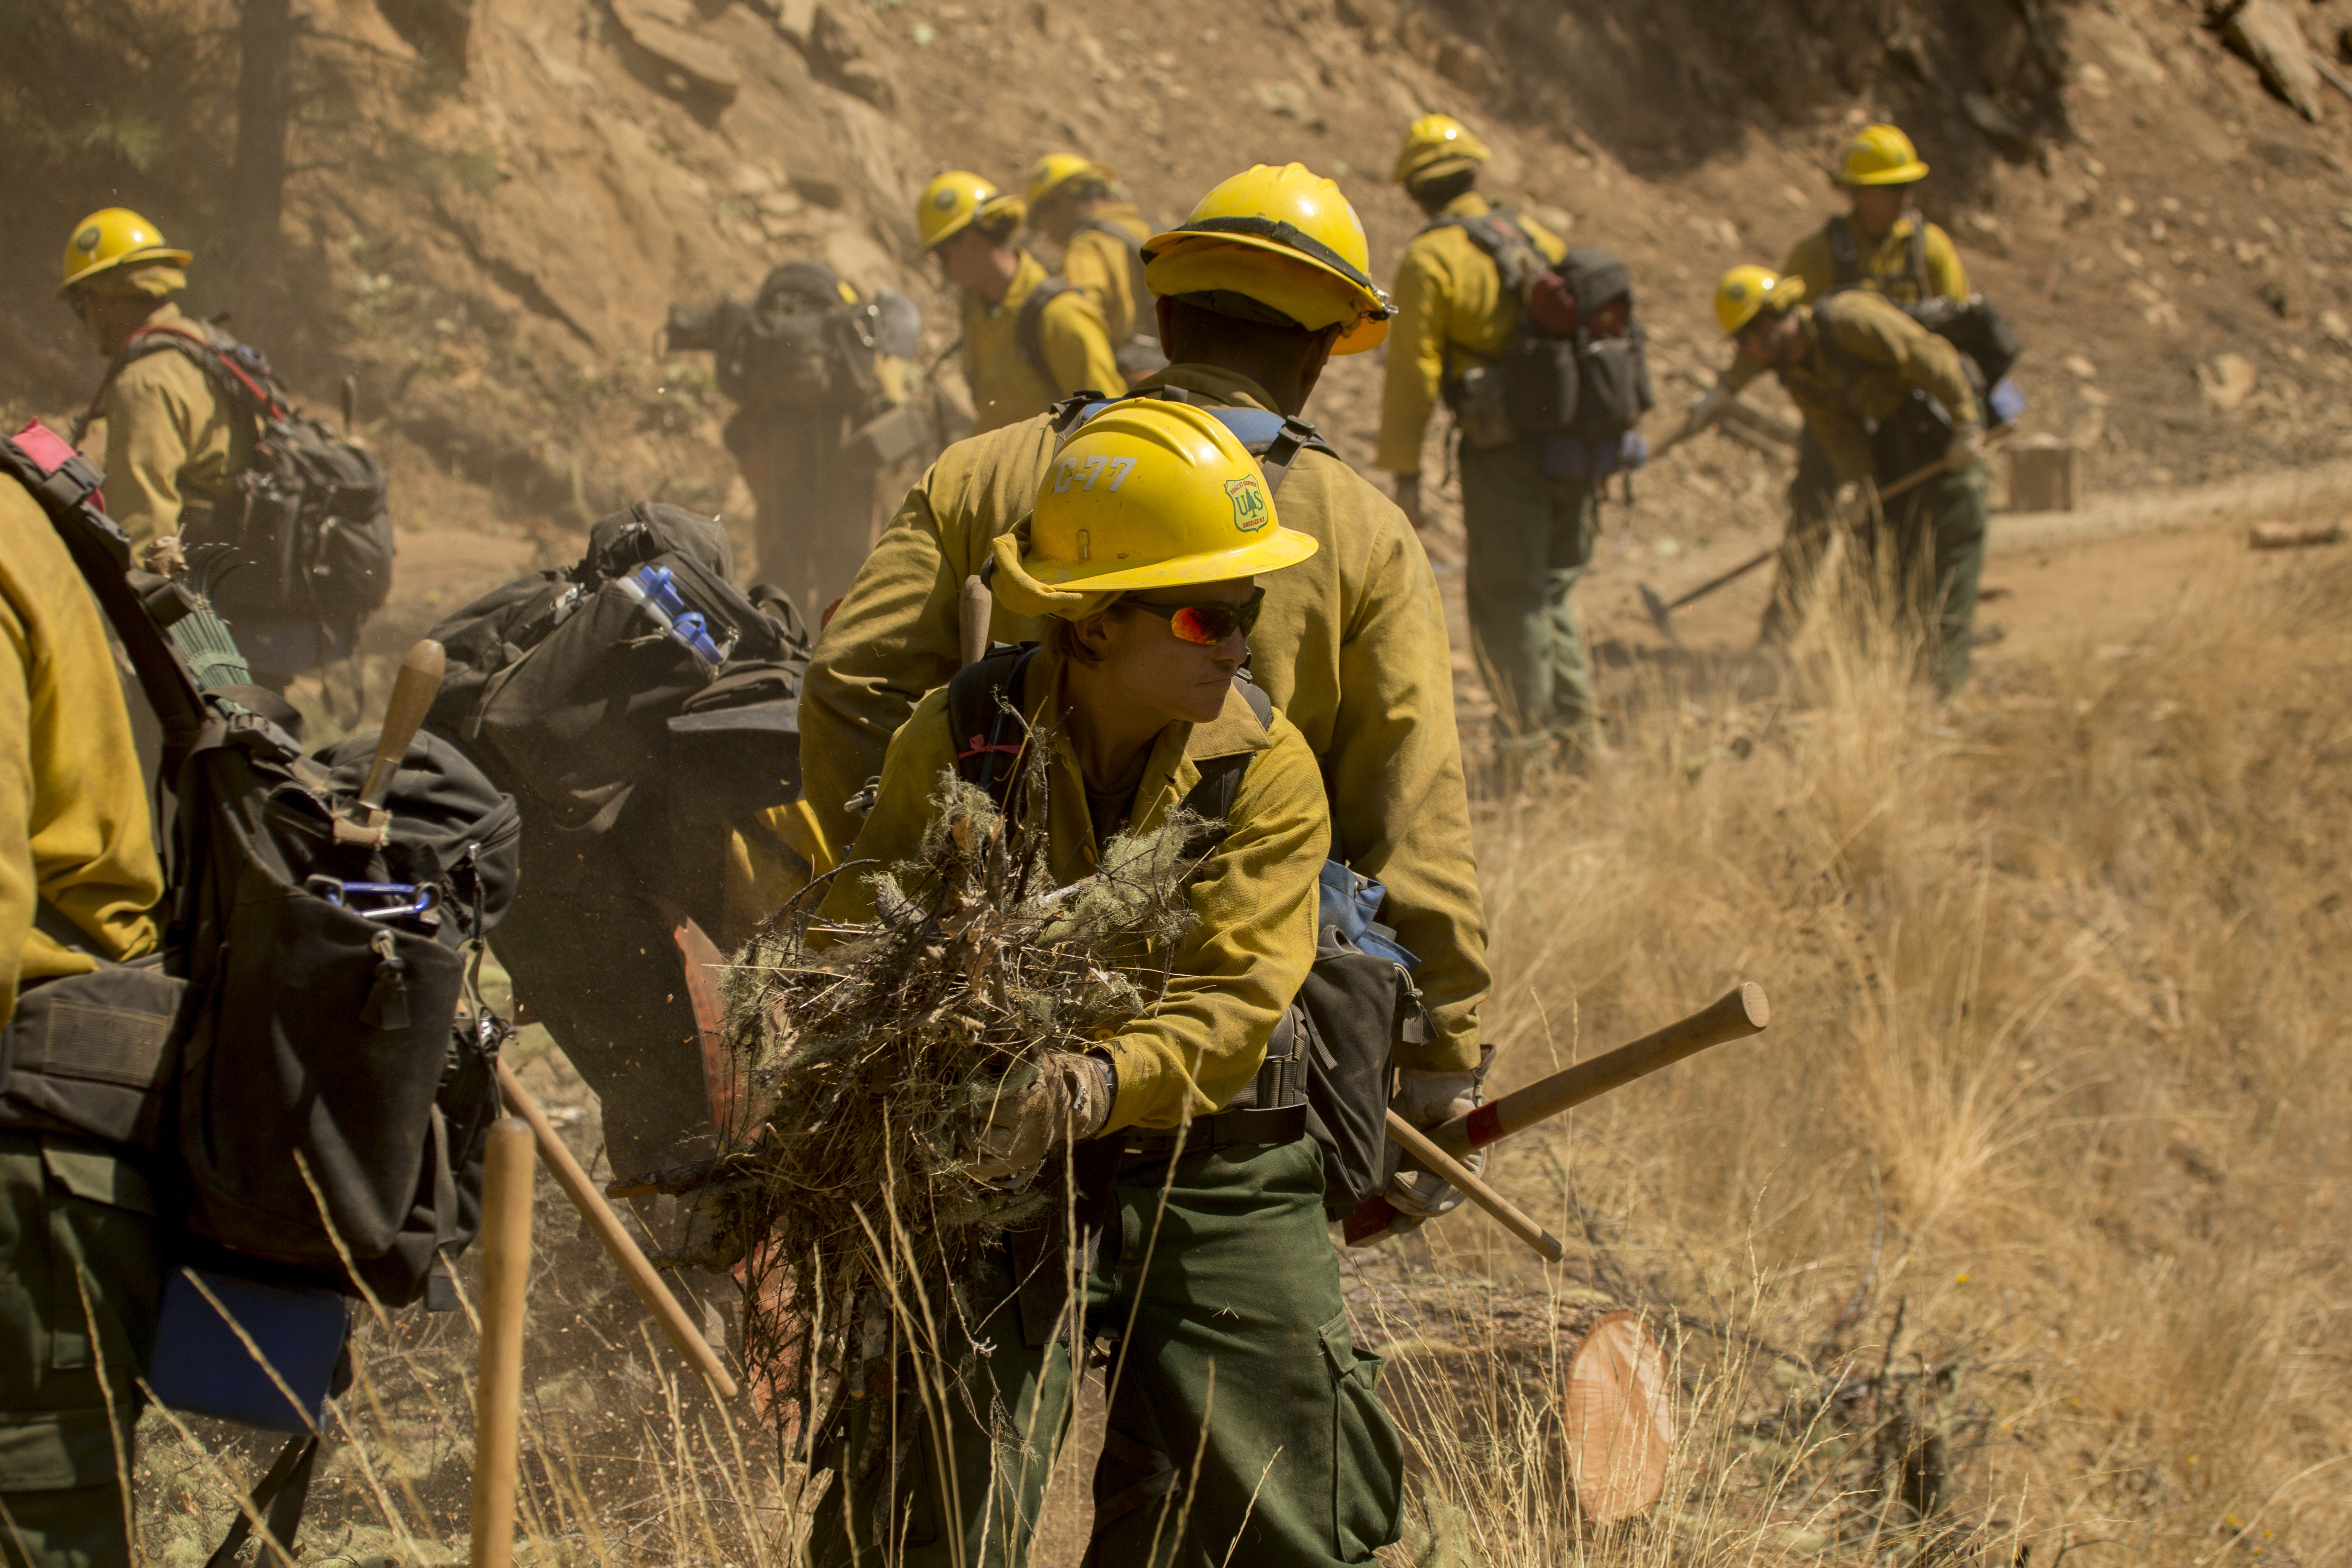 A line of wildland firefighters removing vegetation from a fire break.